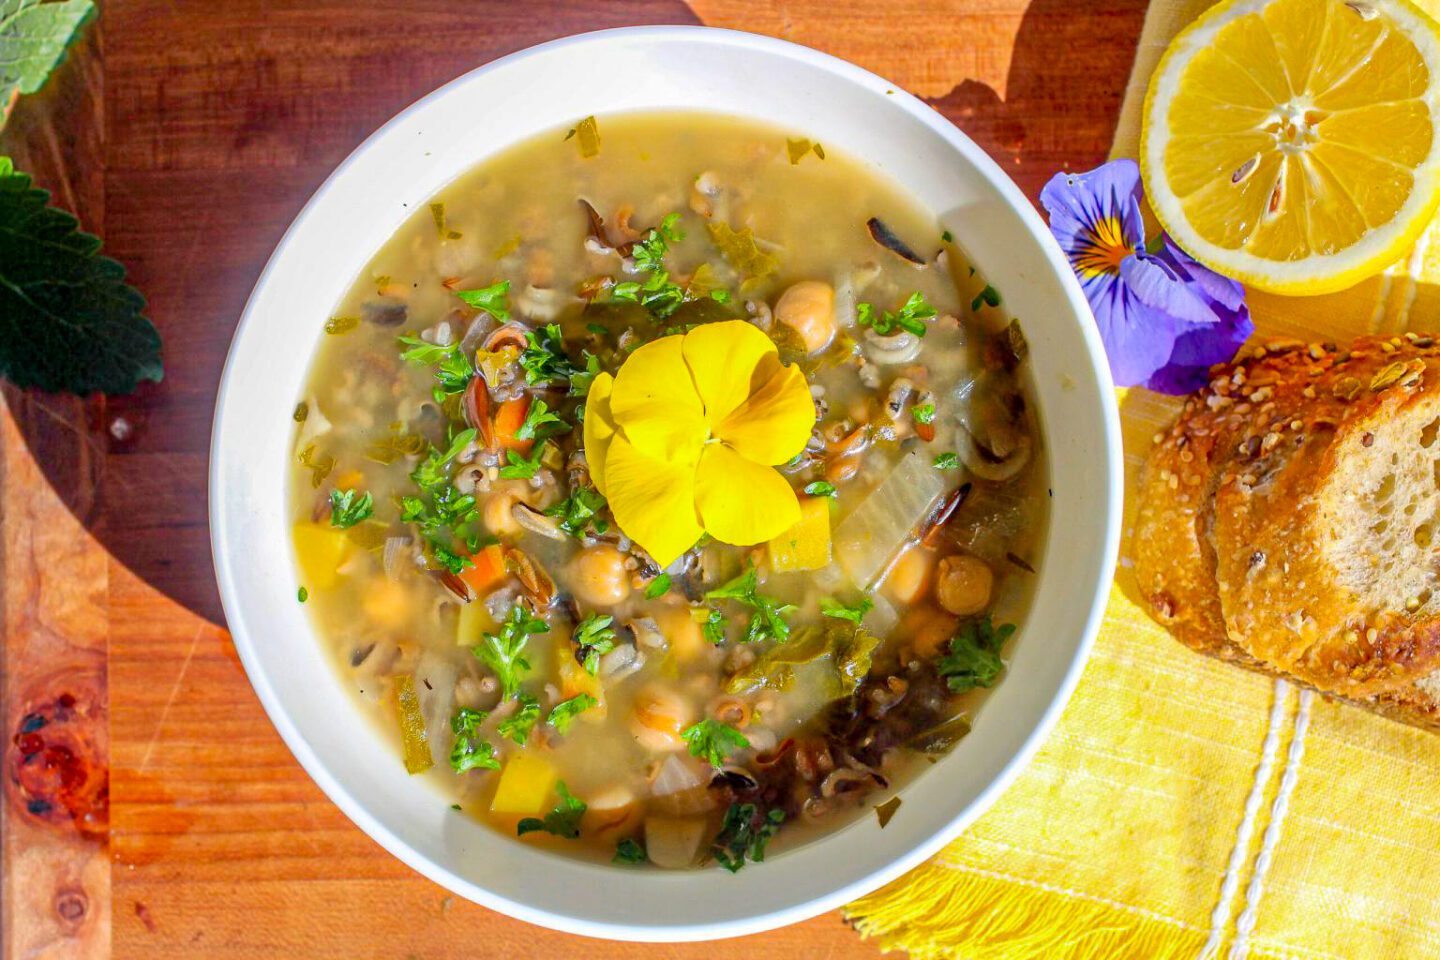 Susan_Cooks_Vegan_Lemony_Chickpea_Wild_Rice_with Parsly_and_Edible_Flowers